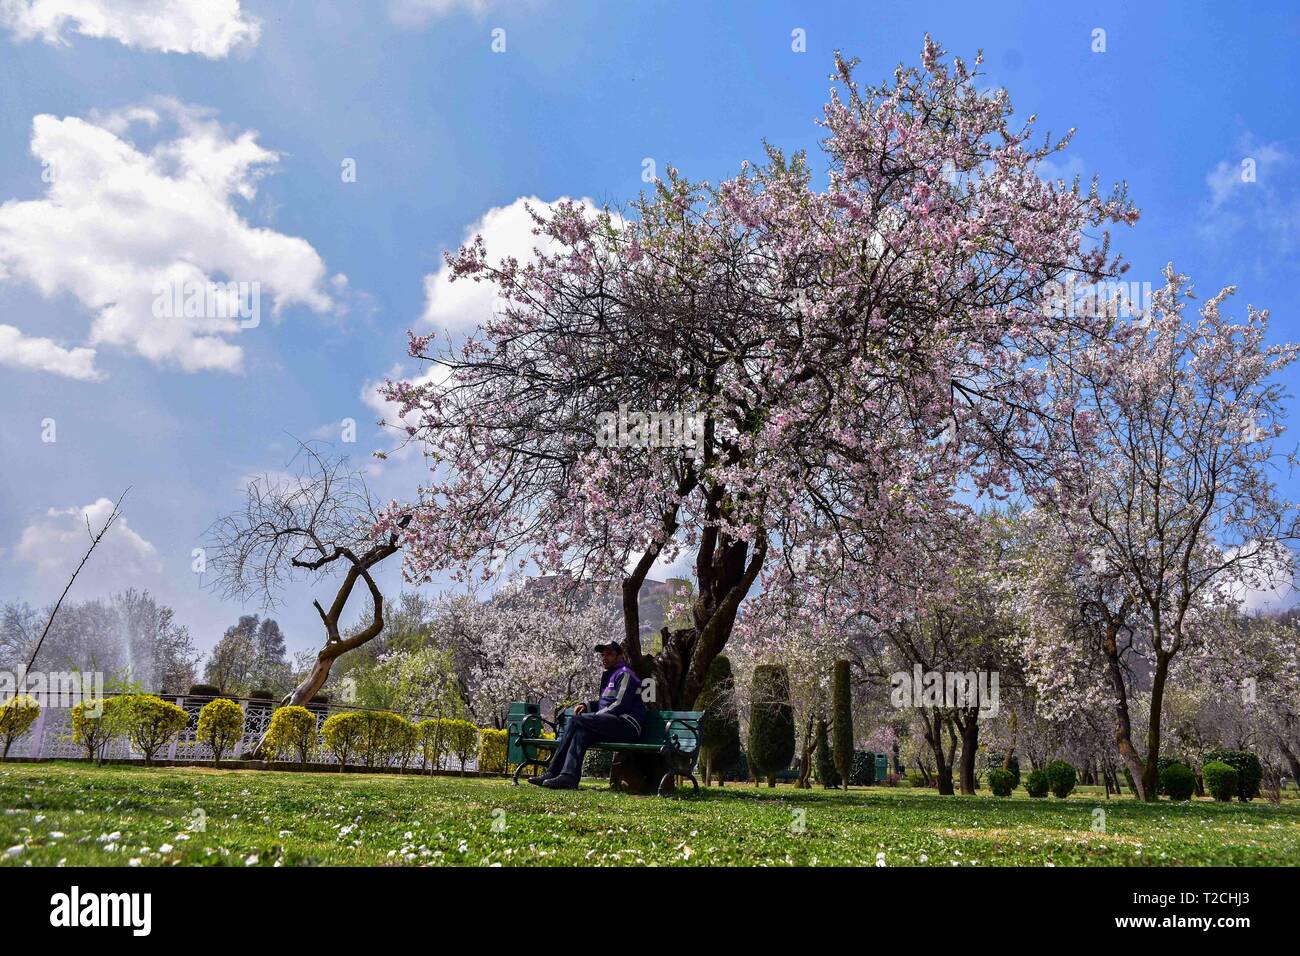 March 31, 2019 - Srinagar, J&K, India - A man is seen relaxing at the Badam Vaer ( Almond garden) on a spring day in Srinagar. Spring has arrived in Kashmir valley, which marks a thawing of the lean season for tourism in the Himalayan region. Credit: Saqib Majeed/SOPA Images/ZUMA Wire/Alamy Live News Stock Photo